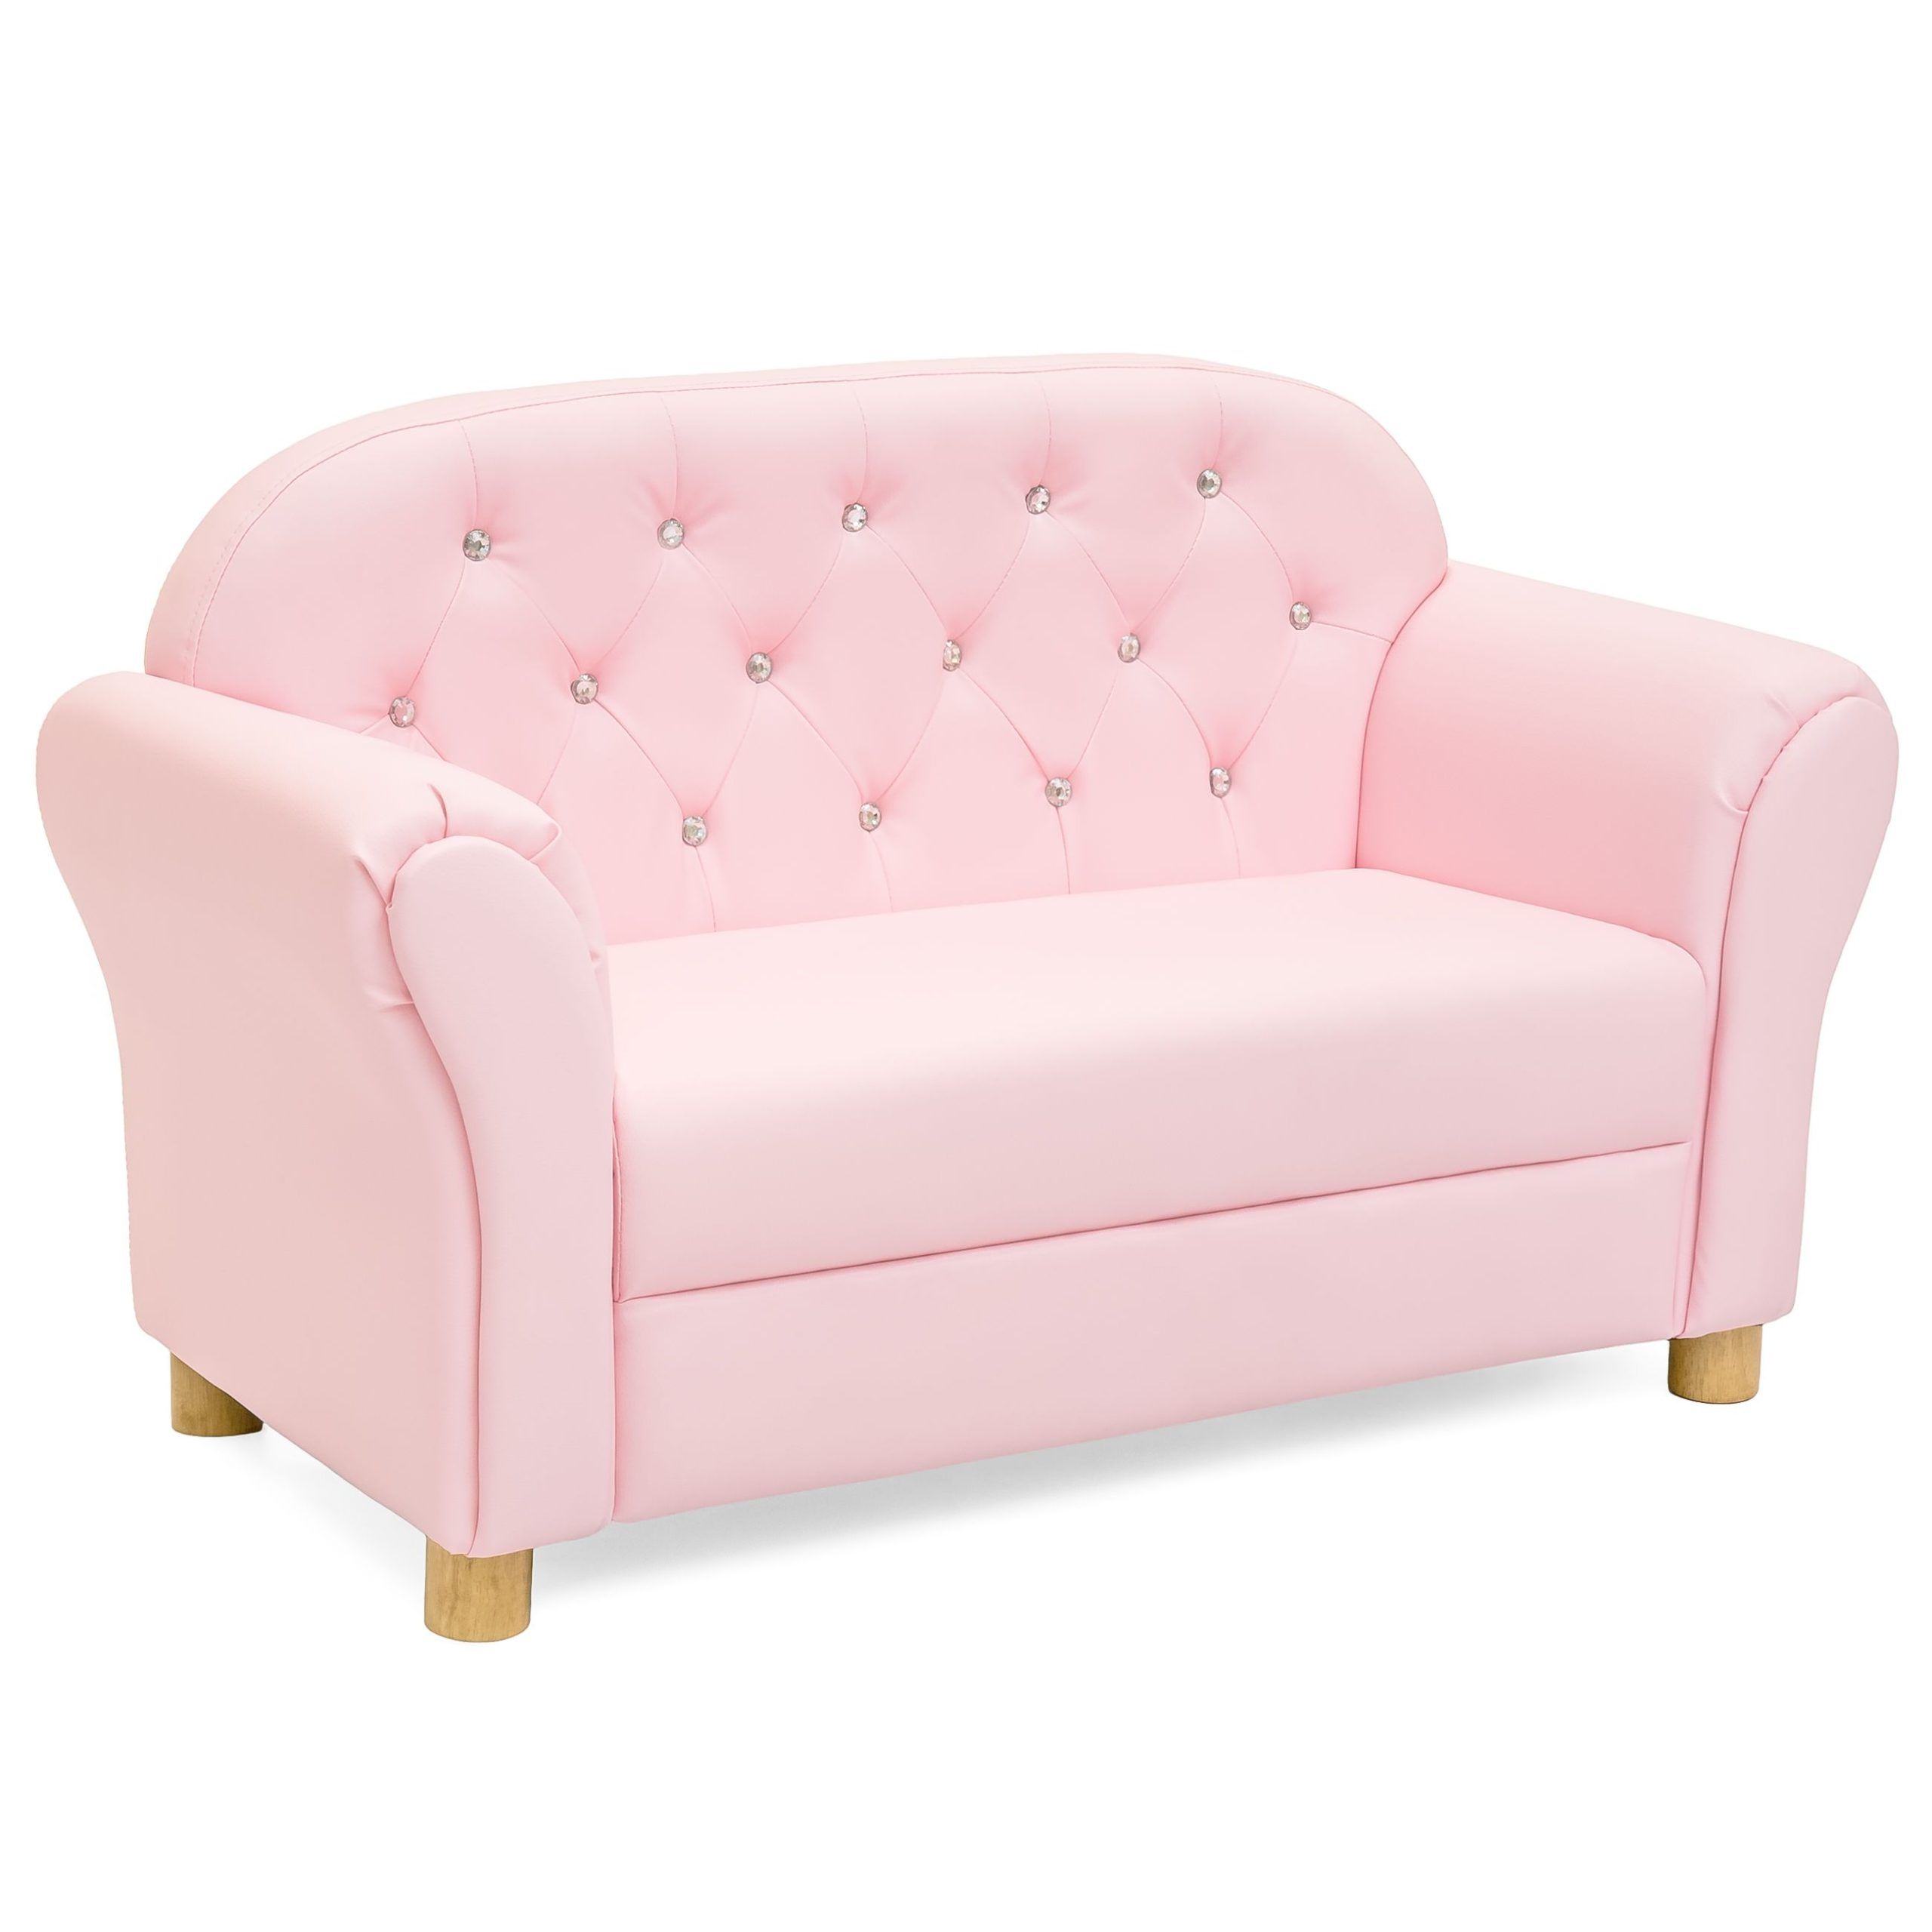 Best Choice Products 36in Upholstered Tufted Mini Sofa Couch For Kids With Regard To Children's Sofa Beds (Gallery 18 of 20)